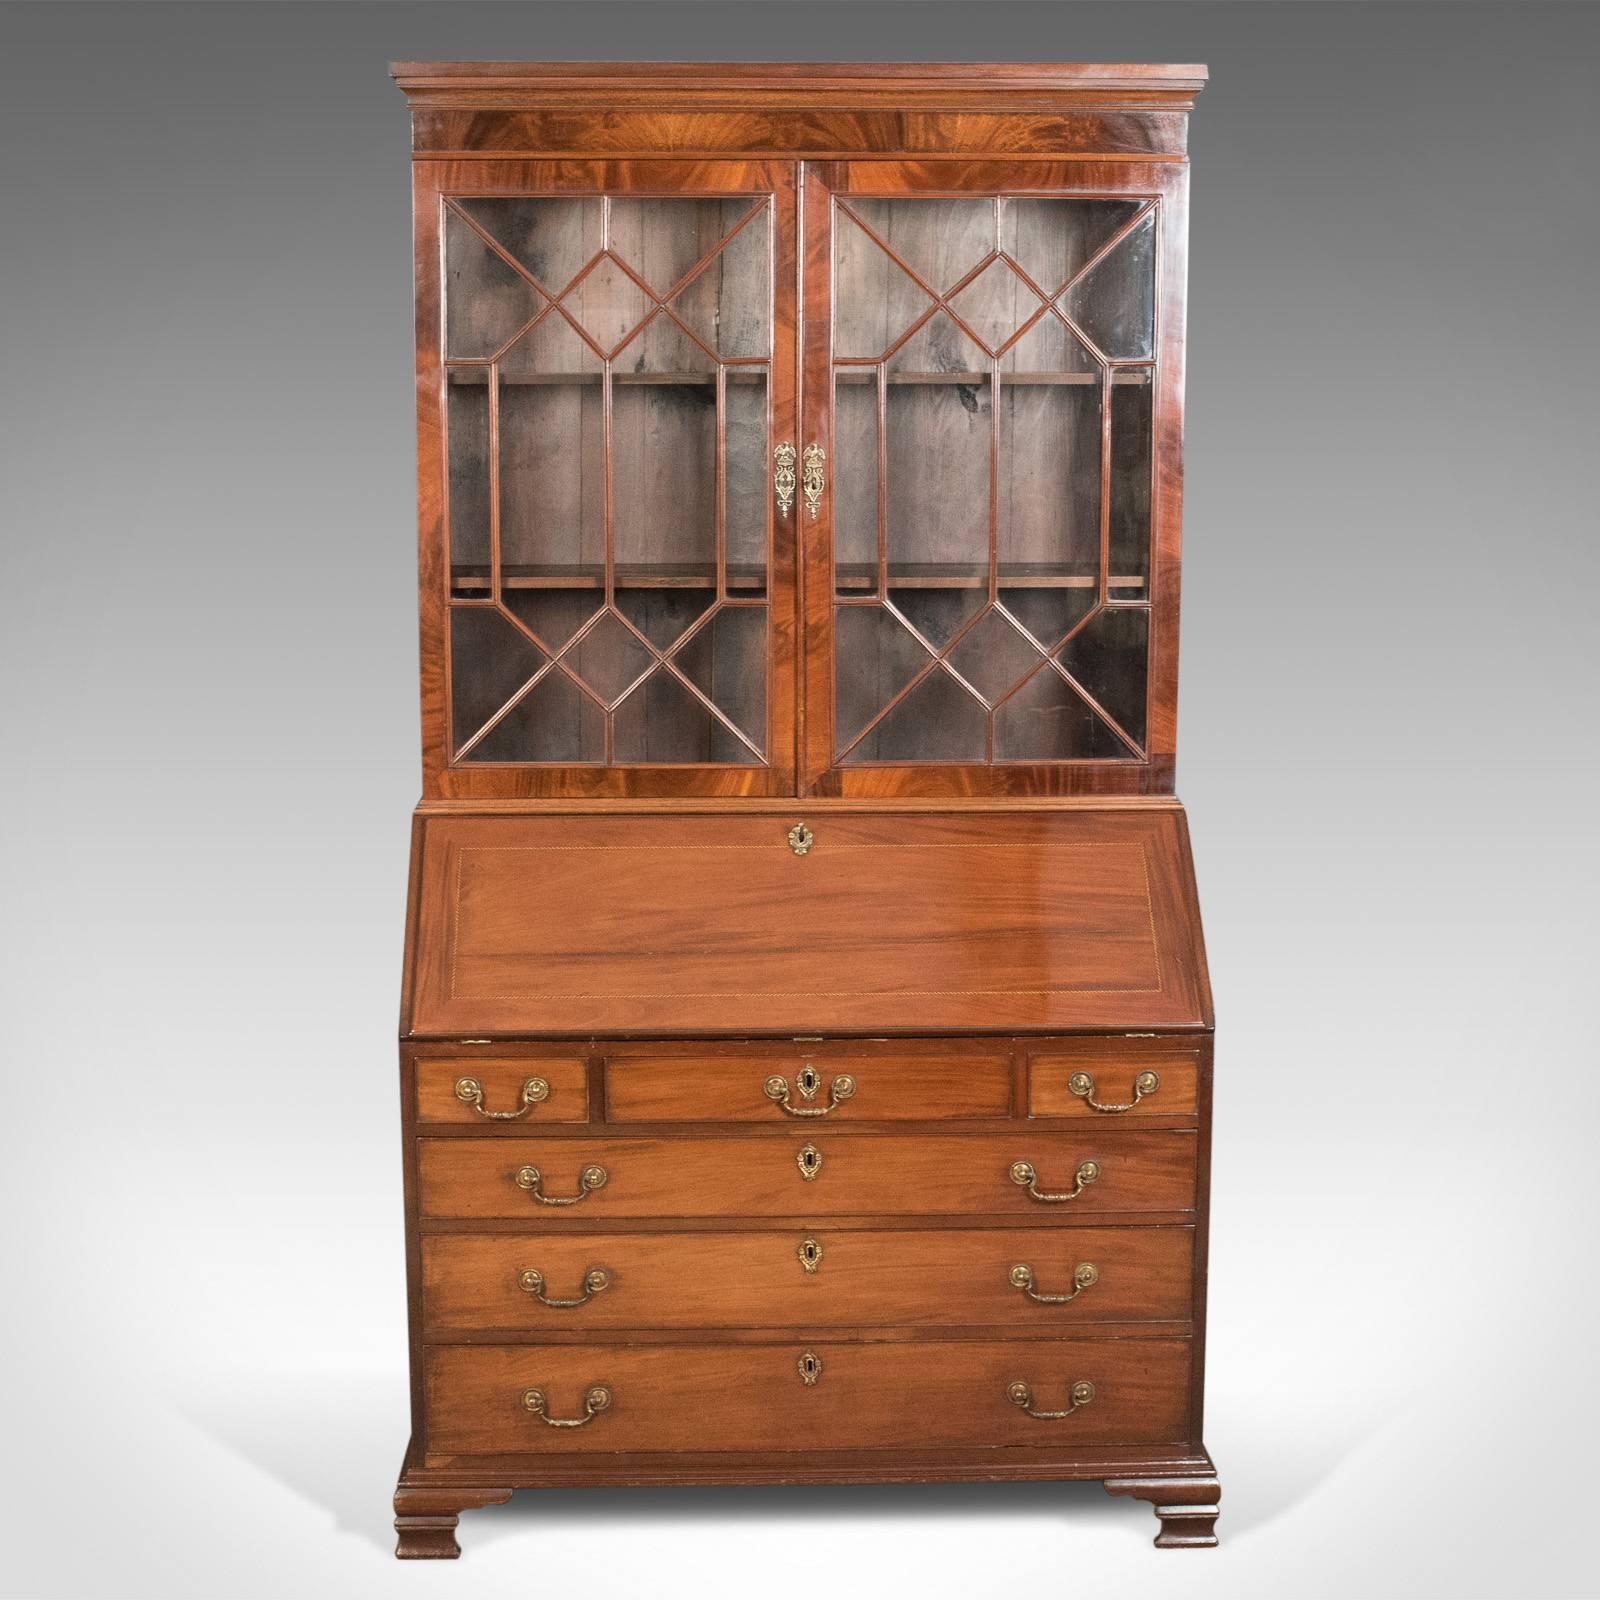 This is an antique bureau bookcase, an English, late Georgian, mahogany writing desk, circa 1800.

A very fine bureau bookcase in flame mahogany displaying good color and grain interest
Featuring good proportions, useful storage, generous